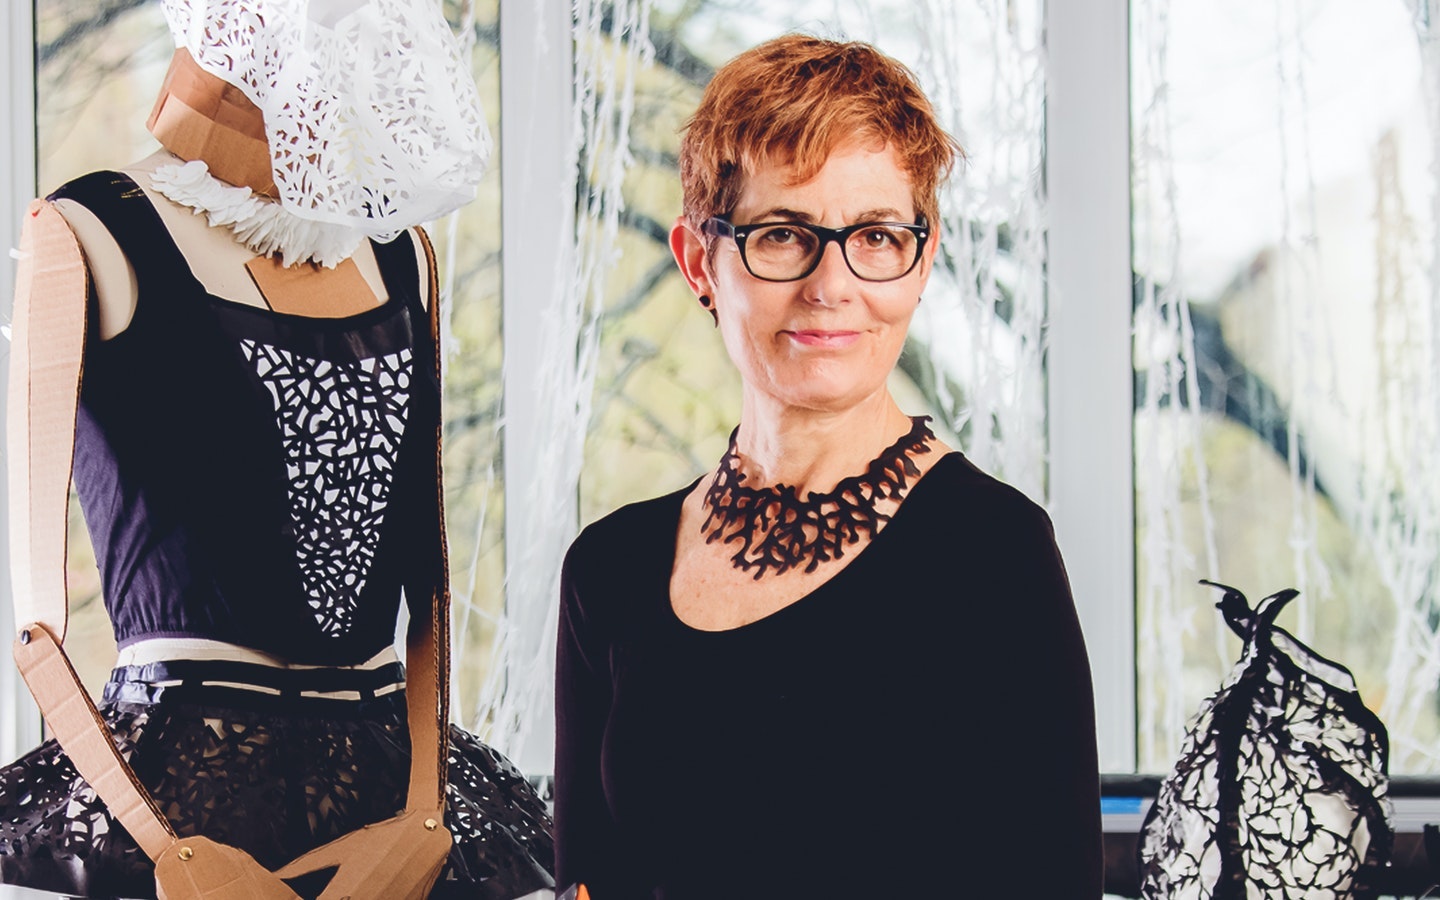 Visual artist Beatrice Coron posing with and wearing her cut creations. Photo by Ric Kallaher.